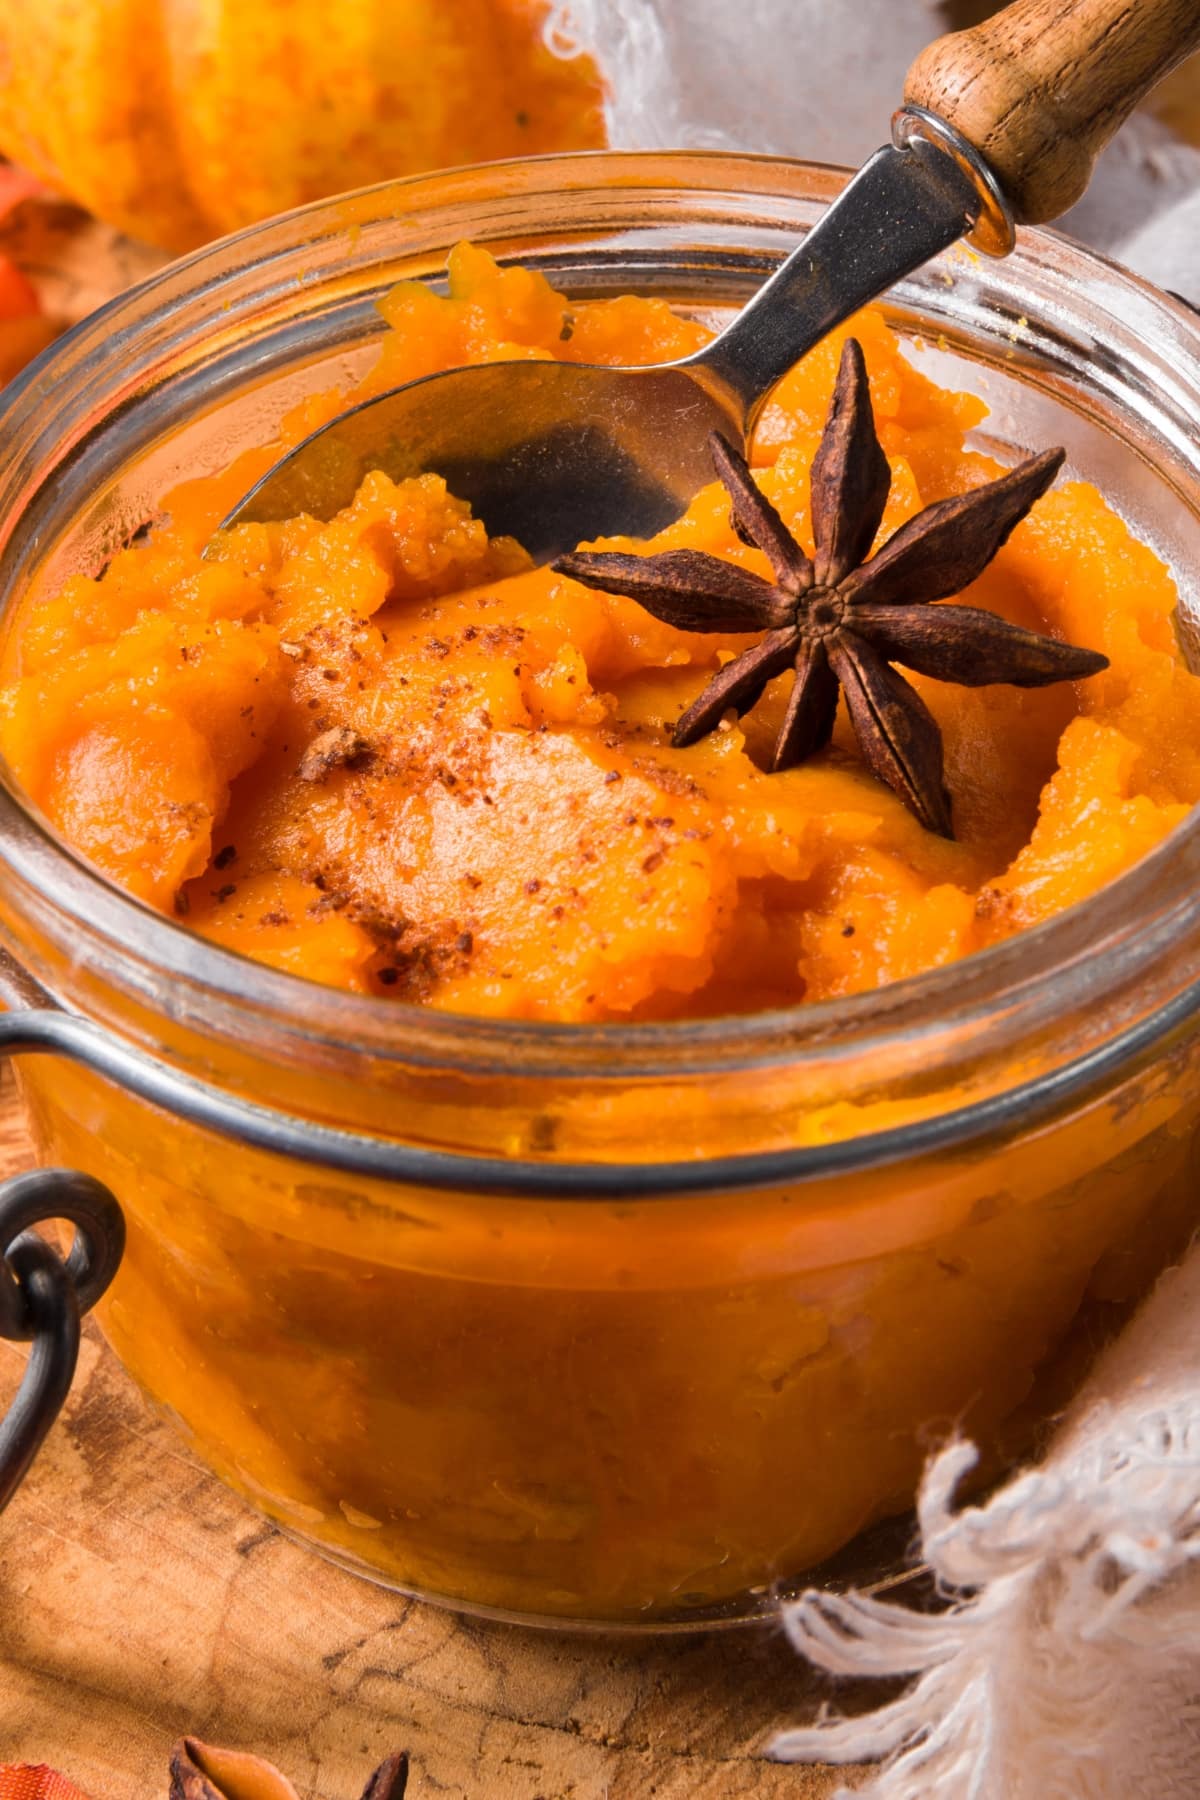 Can You Freeze Canned Pumpkin Puree? featuring Pumpkin Puree in a Glass Jar with Spoon and Cinnamon and Star Anise on Top